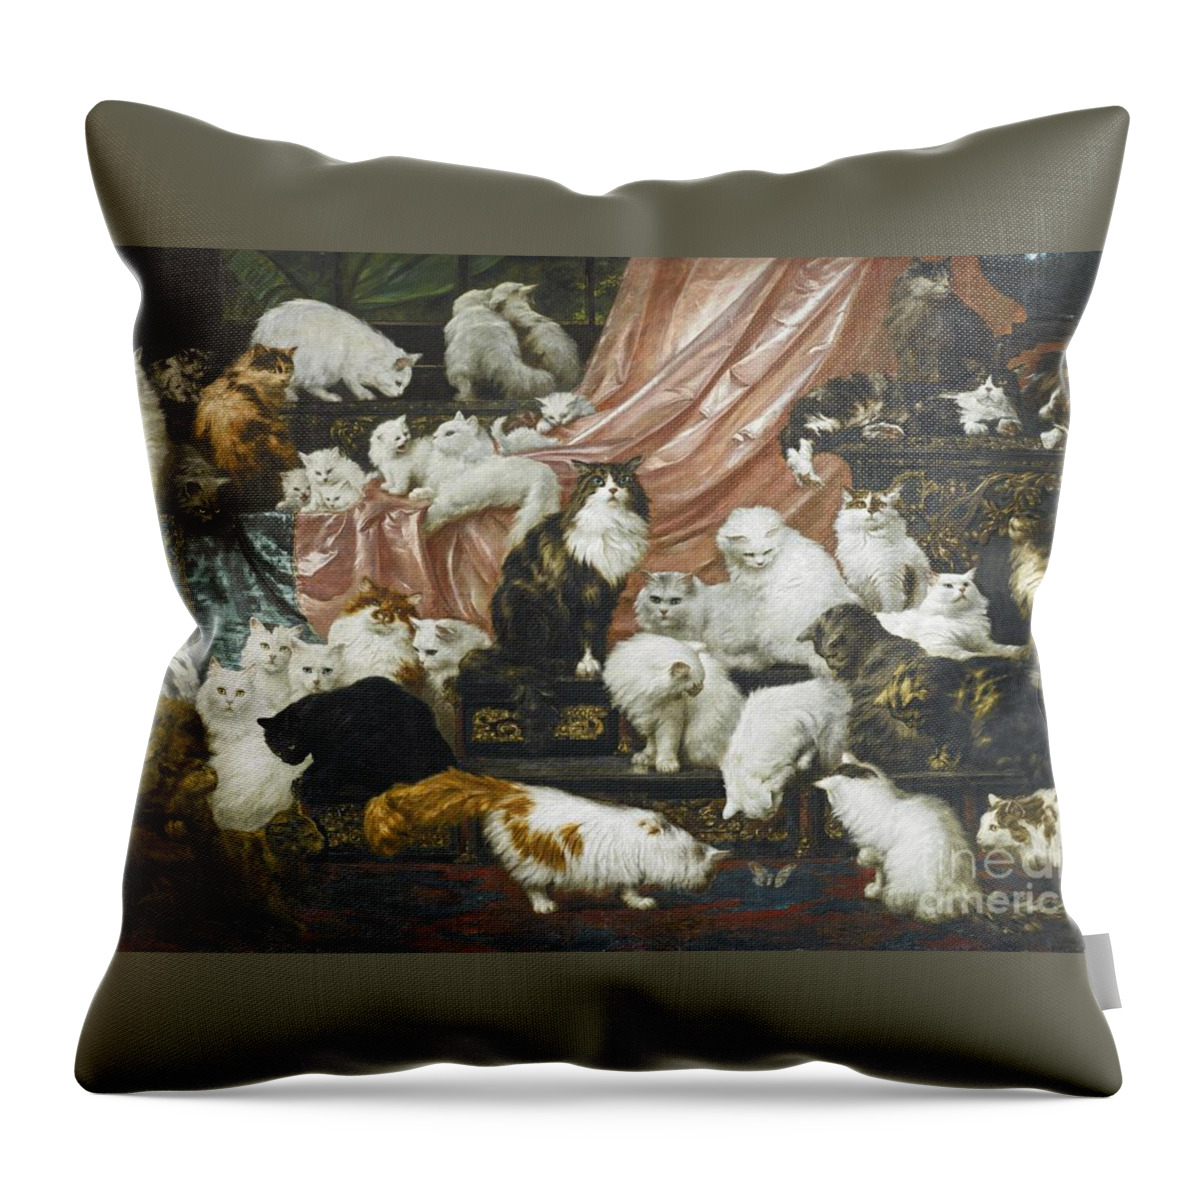 Carl Kahler 1855-1906 Austrian My Wife's Lovers.cats Throw Pillow featuring the painting Austrian My Wife's Lovers by MotionAge Designs